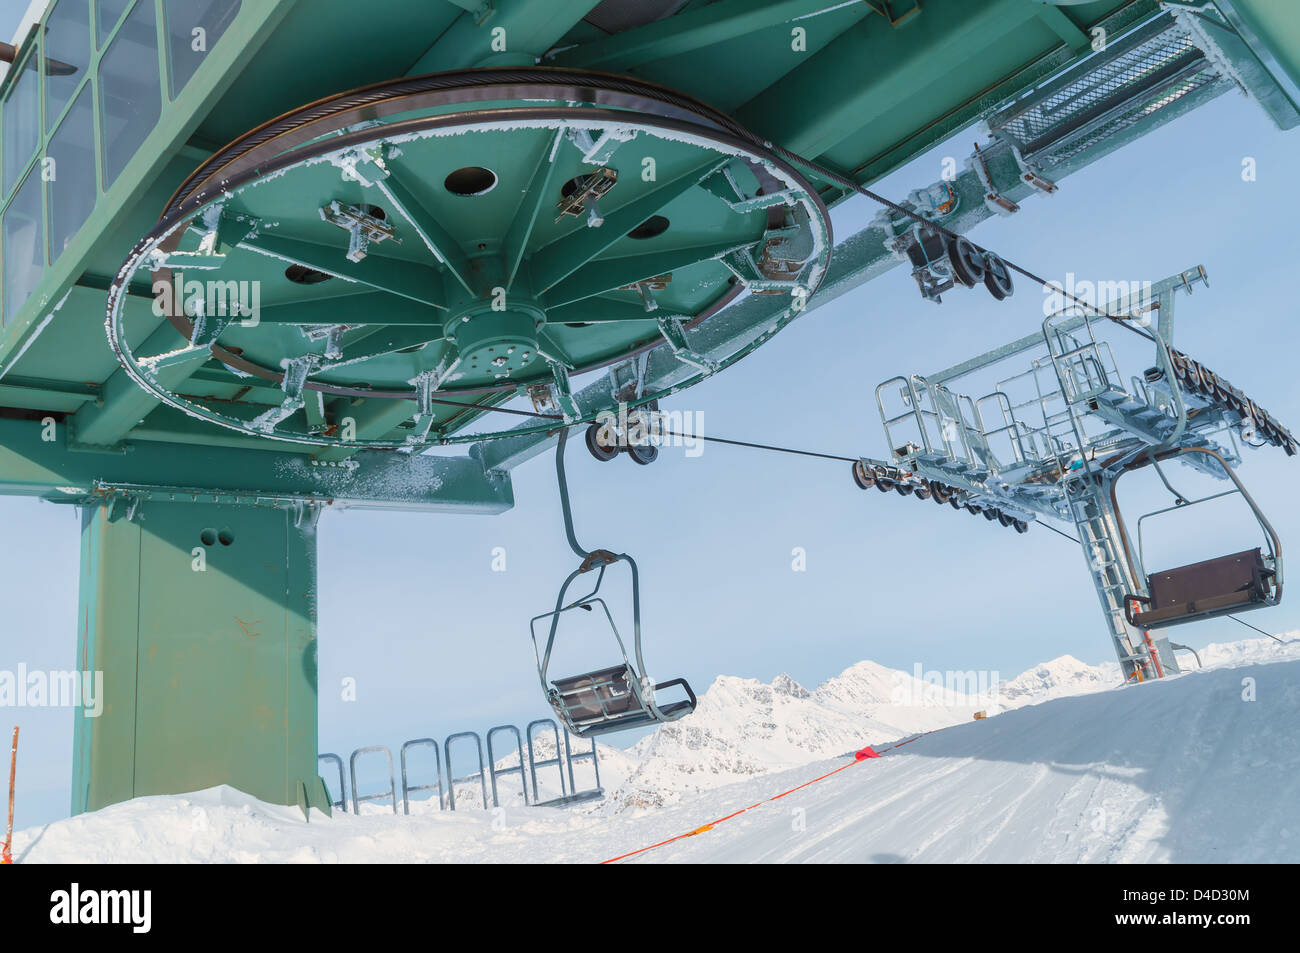 Big Chairlift Wheel In Italian Ski Area On Snow Covered Alps Stock